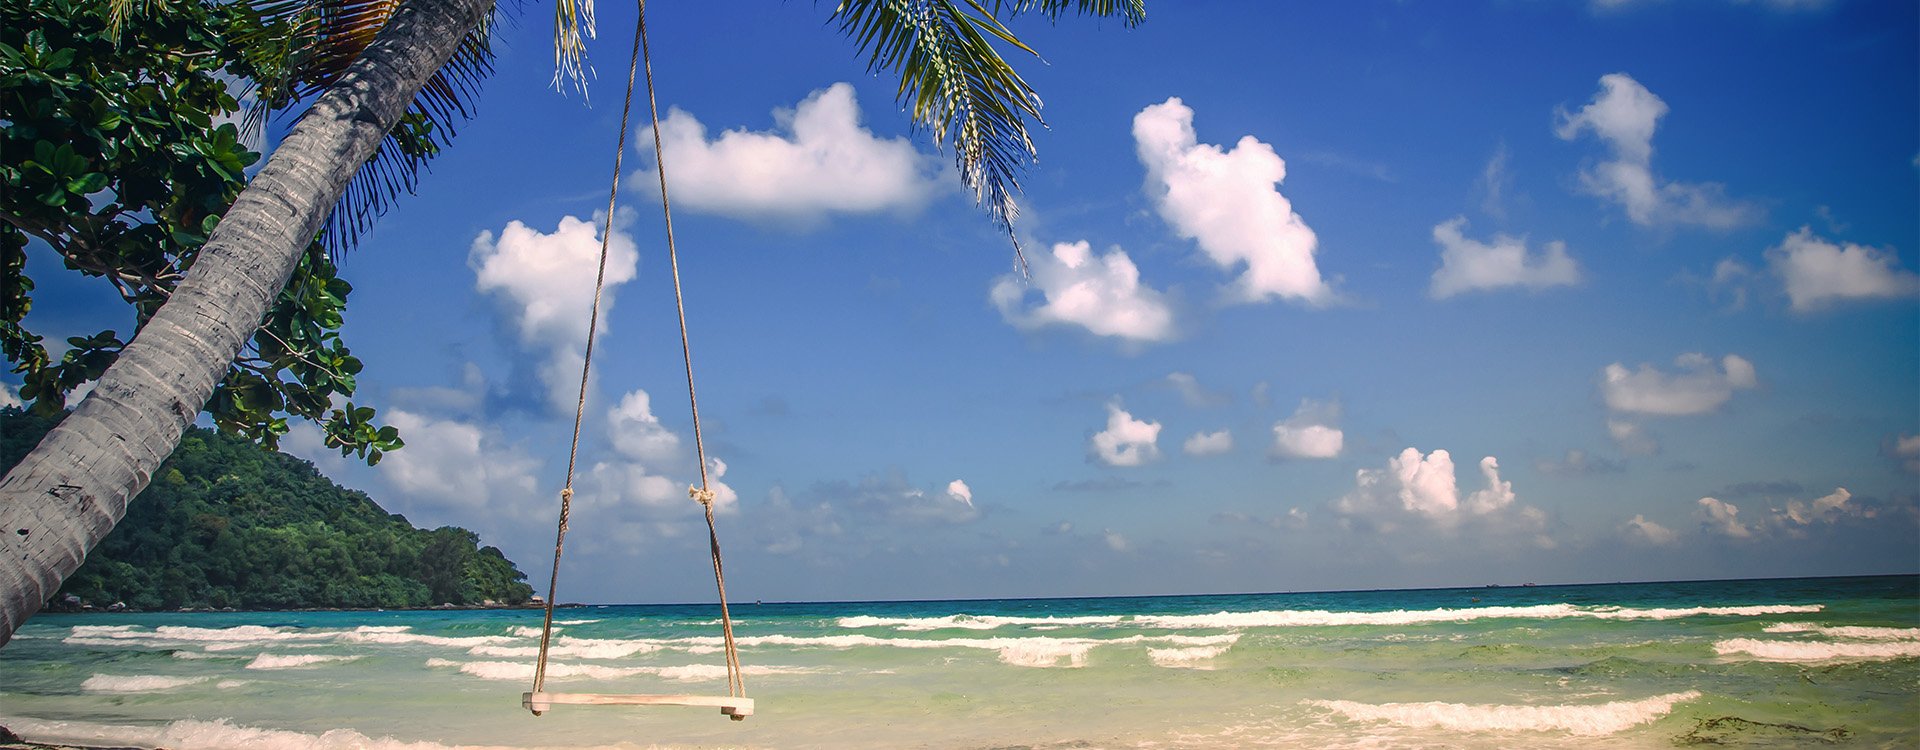 Phu Quoc island, Sao tropical beach in Vietnam. Palm trees and wooden swing on a clear sunny day